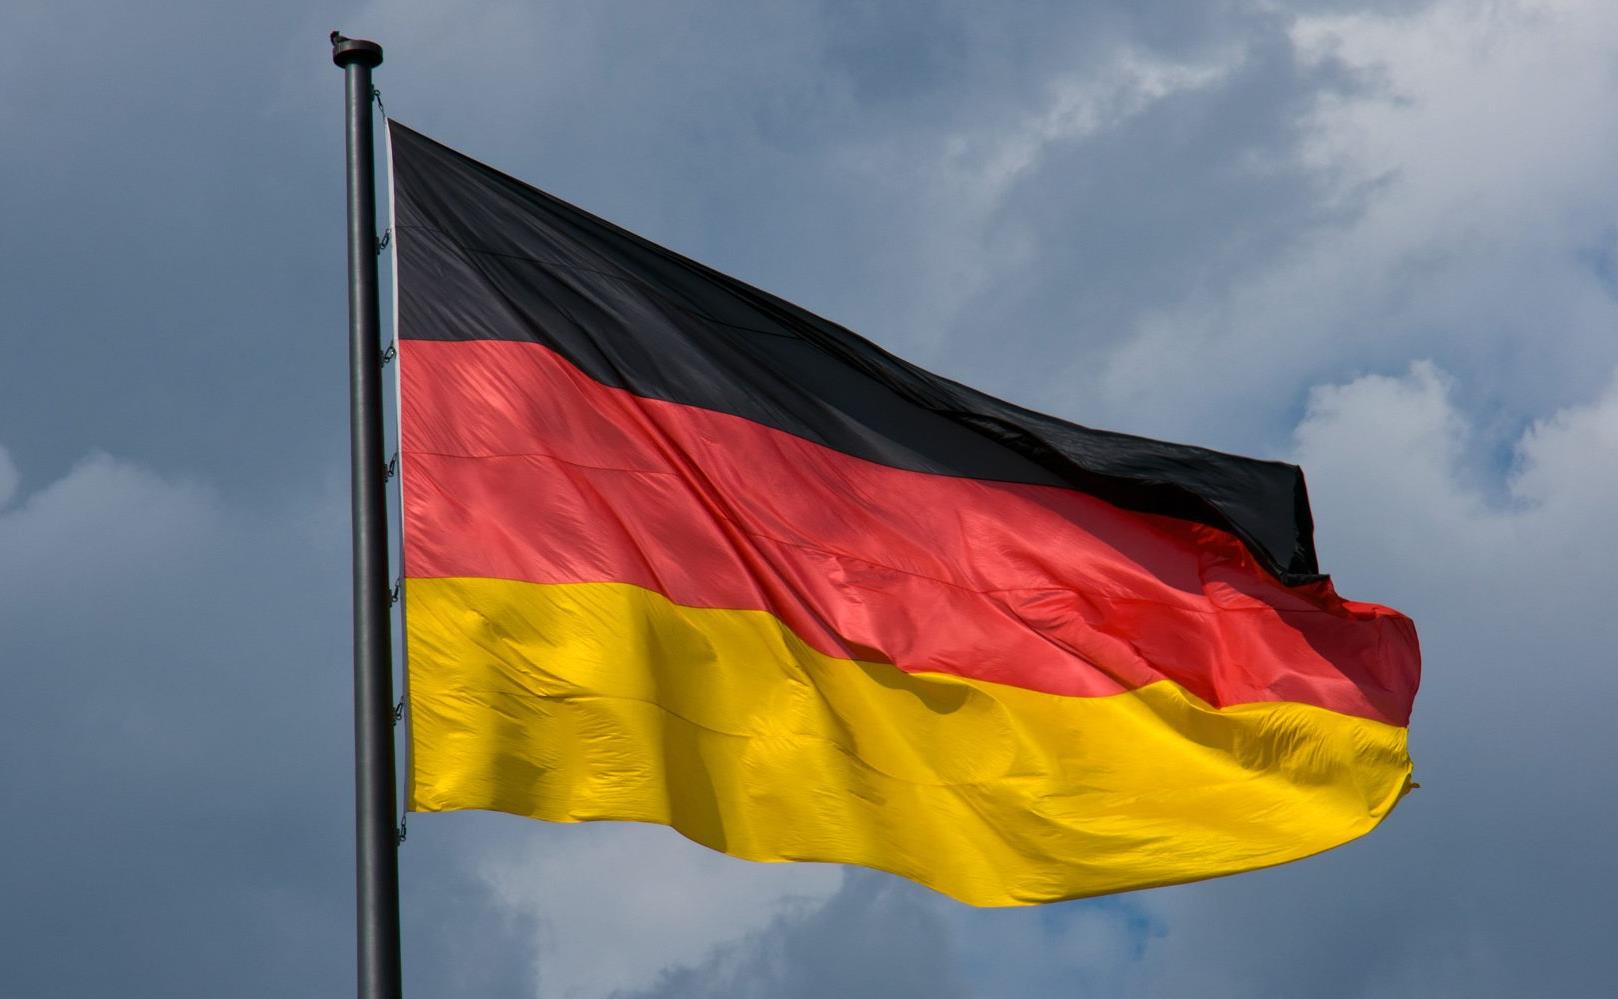 german-flag-in-front-of-dark-clouds-PDLQF4S-1800x1000.jpg